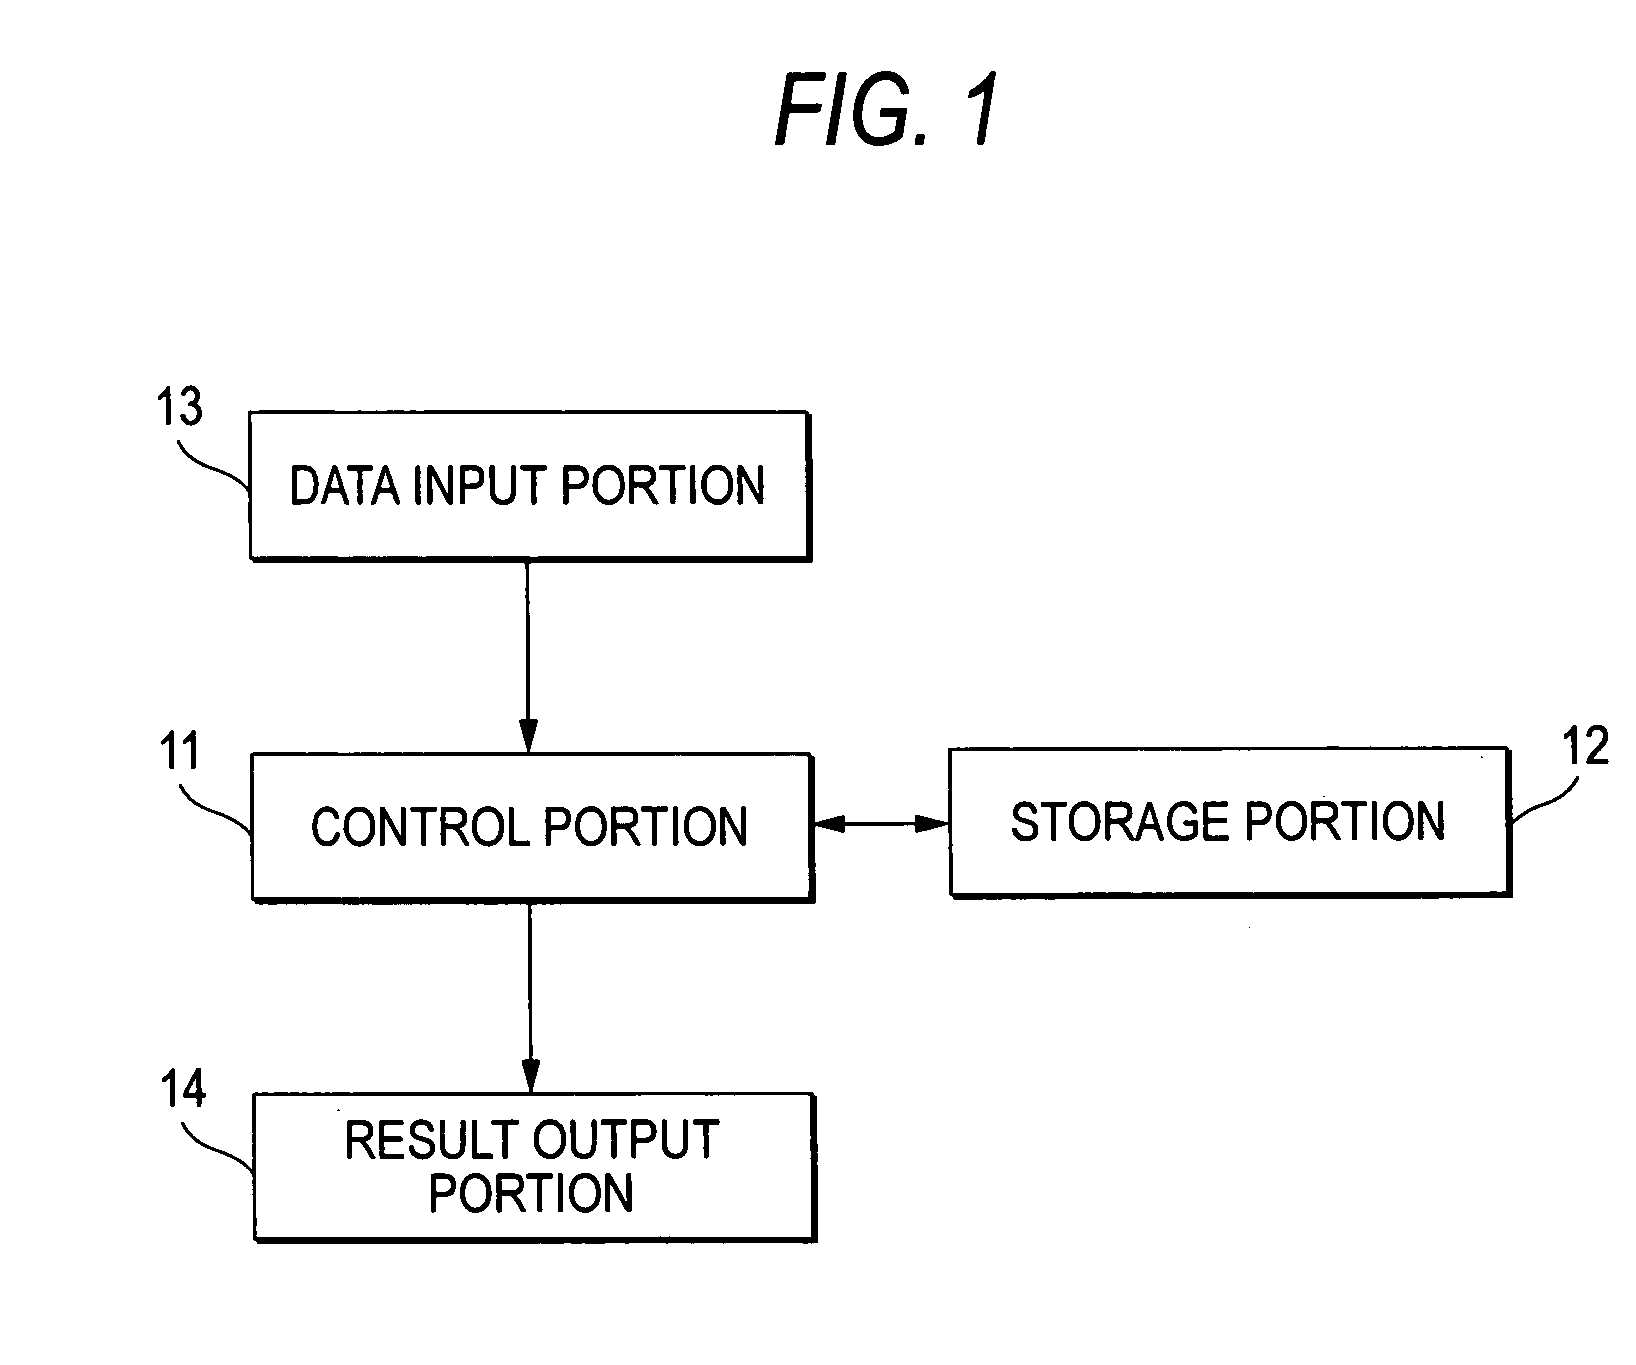 Data analyzer utilizing the spreading activation theory for stemming processing